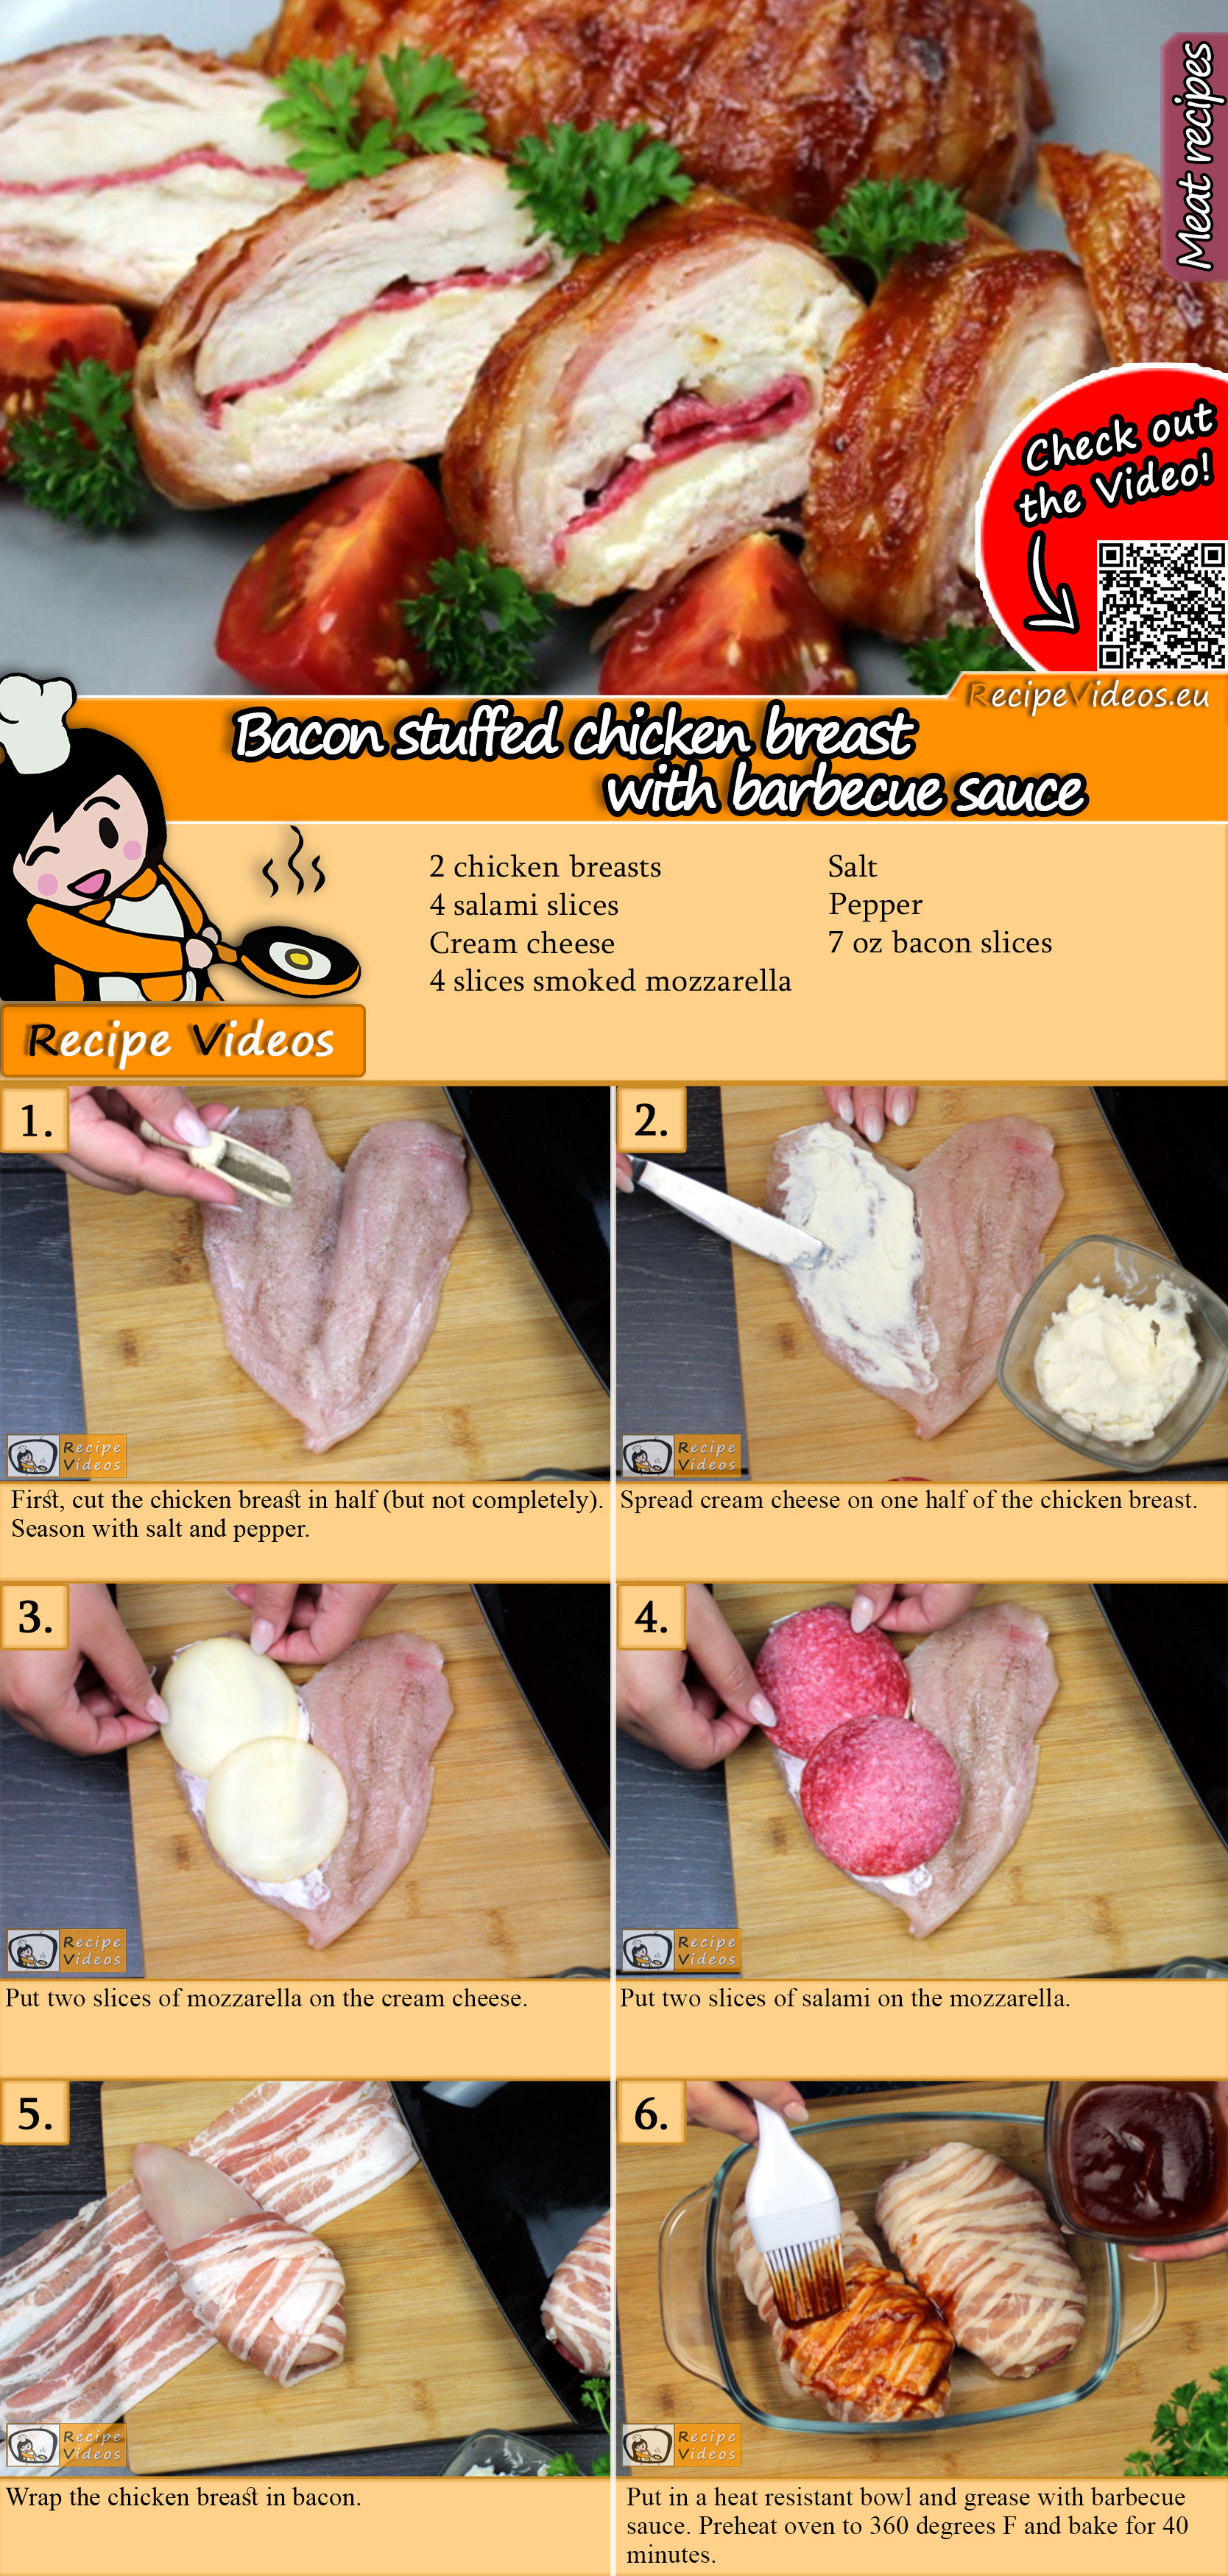 Bacon stuffed chicken breast with barbecue sauce recipe with video